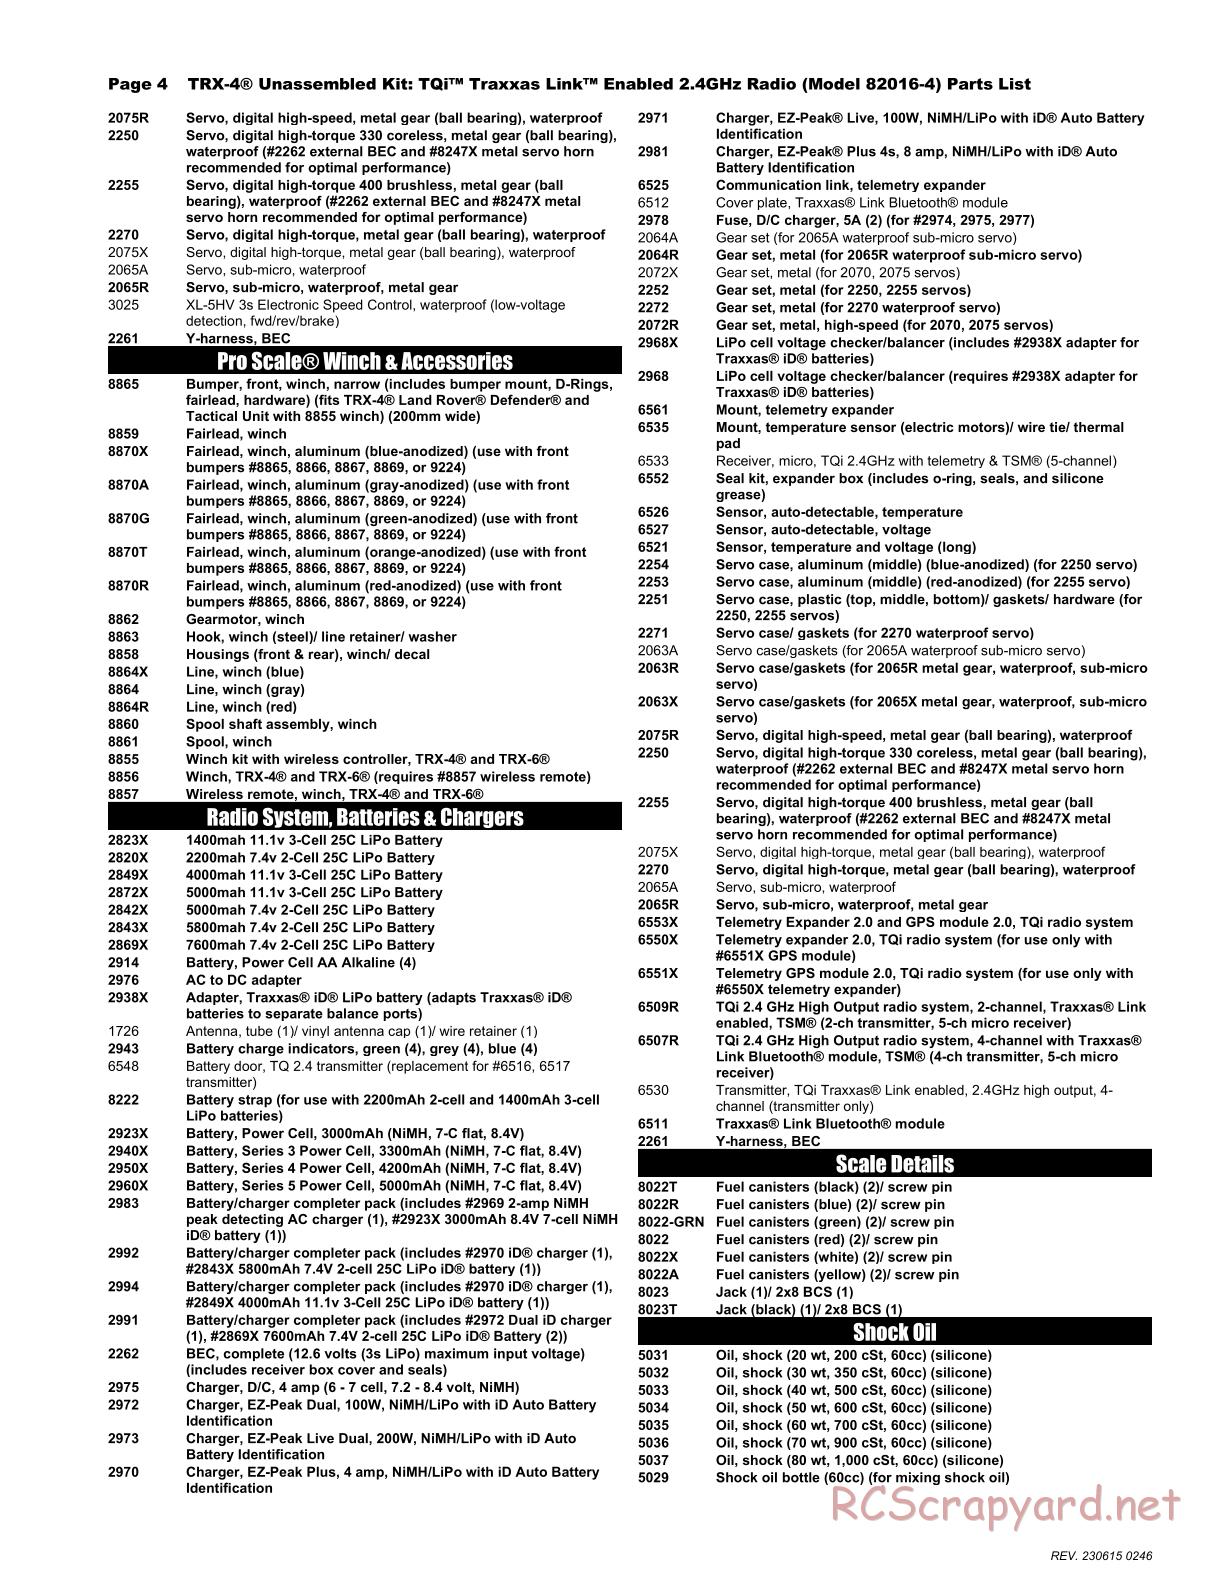 Traxxas - TRX-4 Chassis (2018) - Parts List - Page 4